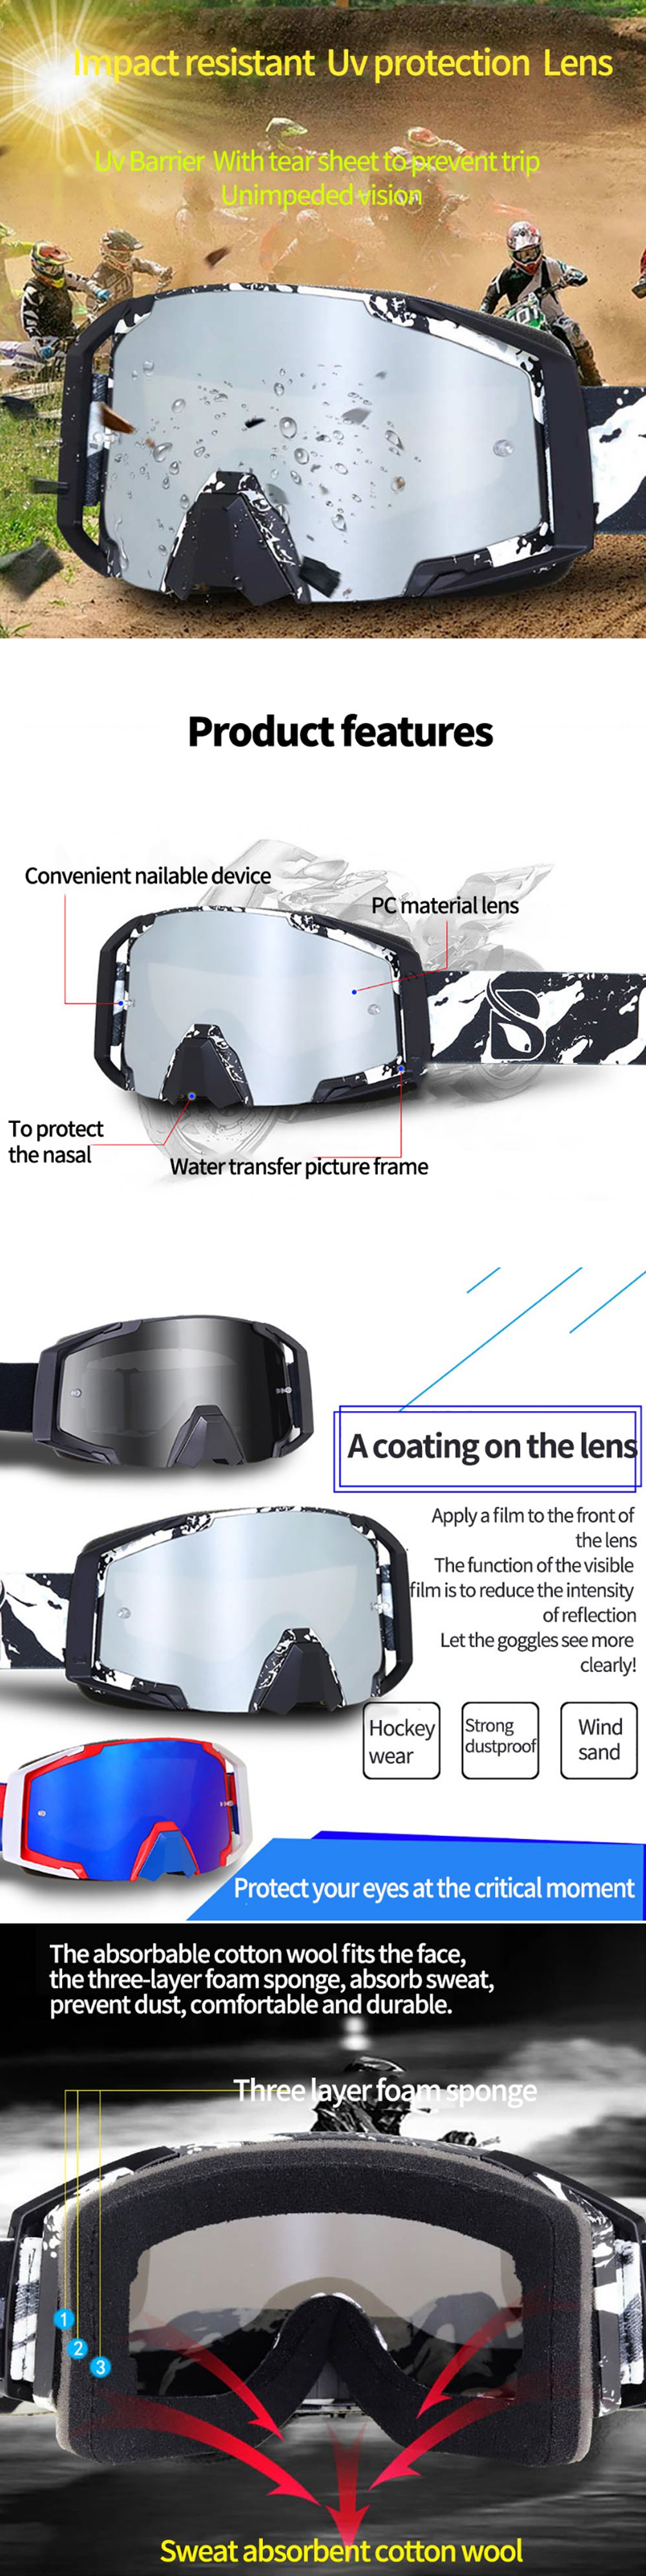 BOLLFO-Windproof-Skiing-Goggles-Dust-proof-Anti-UV-Riding-Motorcycle-Safety-Glasses-Outdoor-Sport-Pr-1763436-1